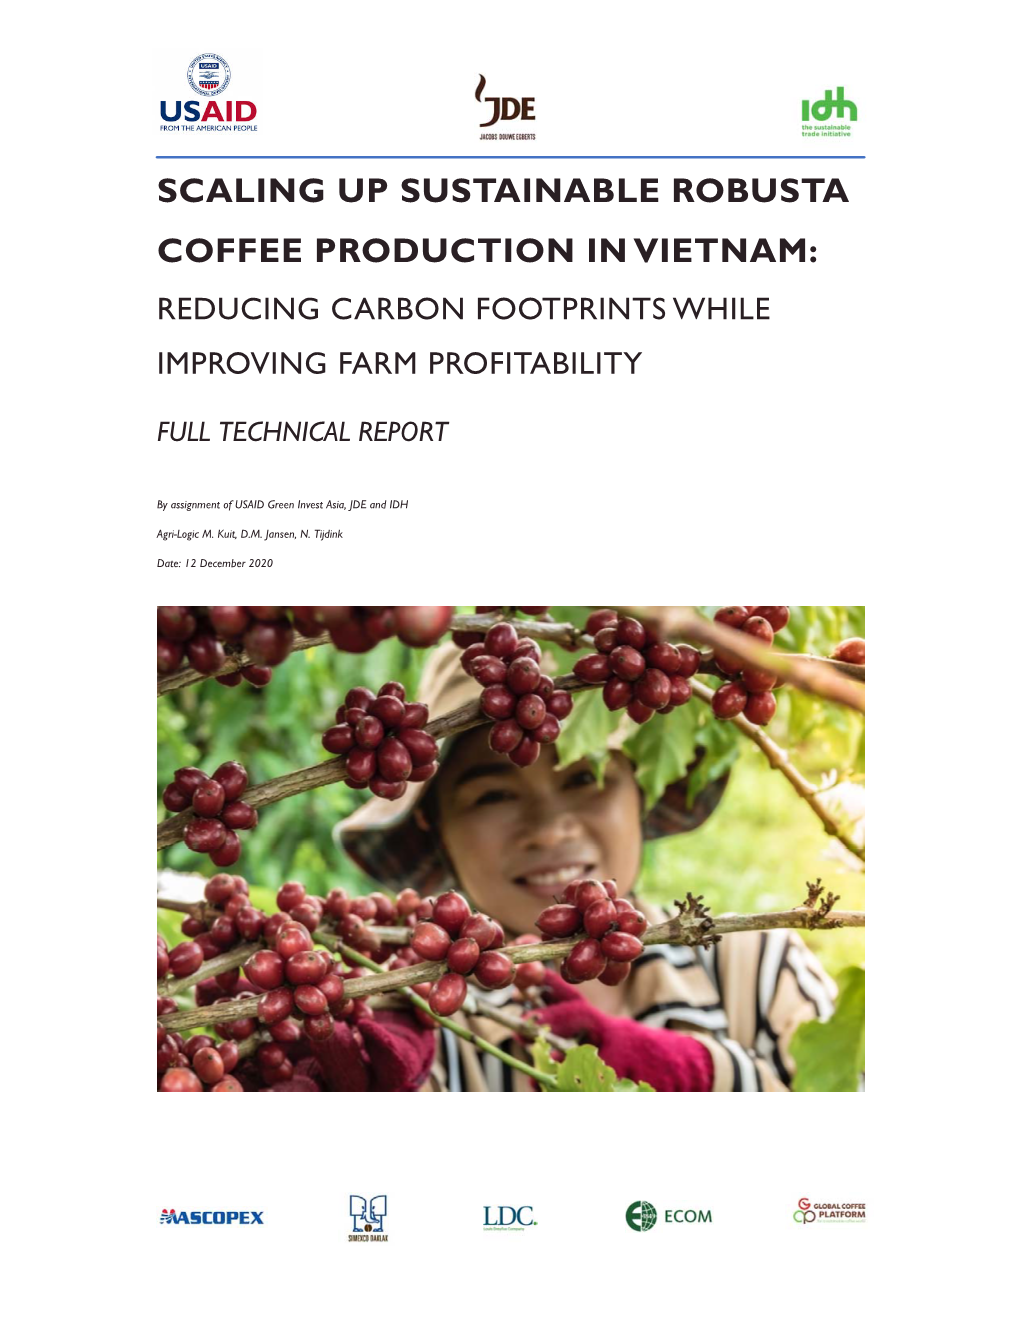 Scaling up Sustainable Robusta Coffee Production in Vietnam: Reducing Carbon Footprints While Improving Farm Profitability